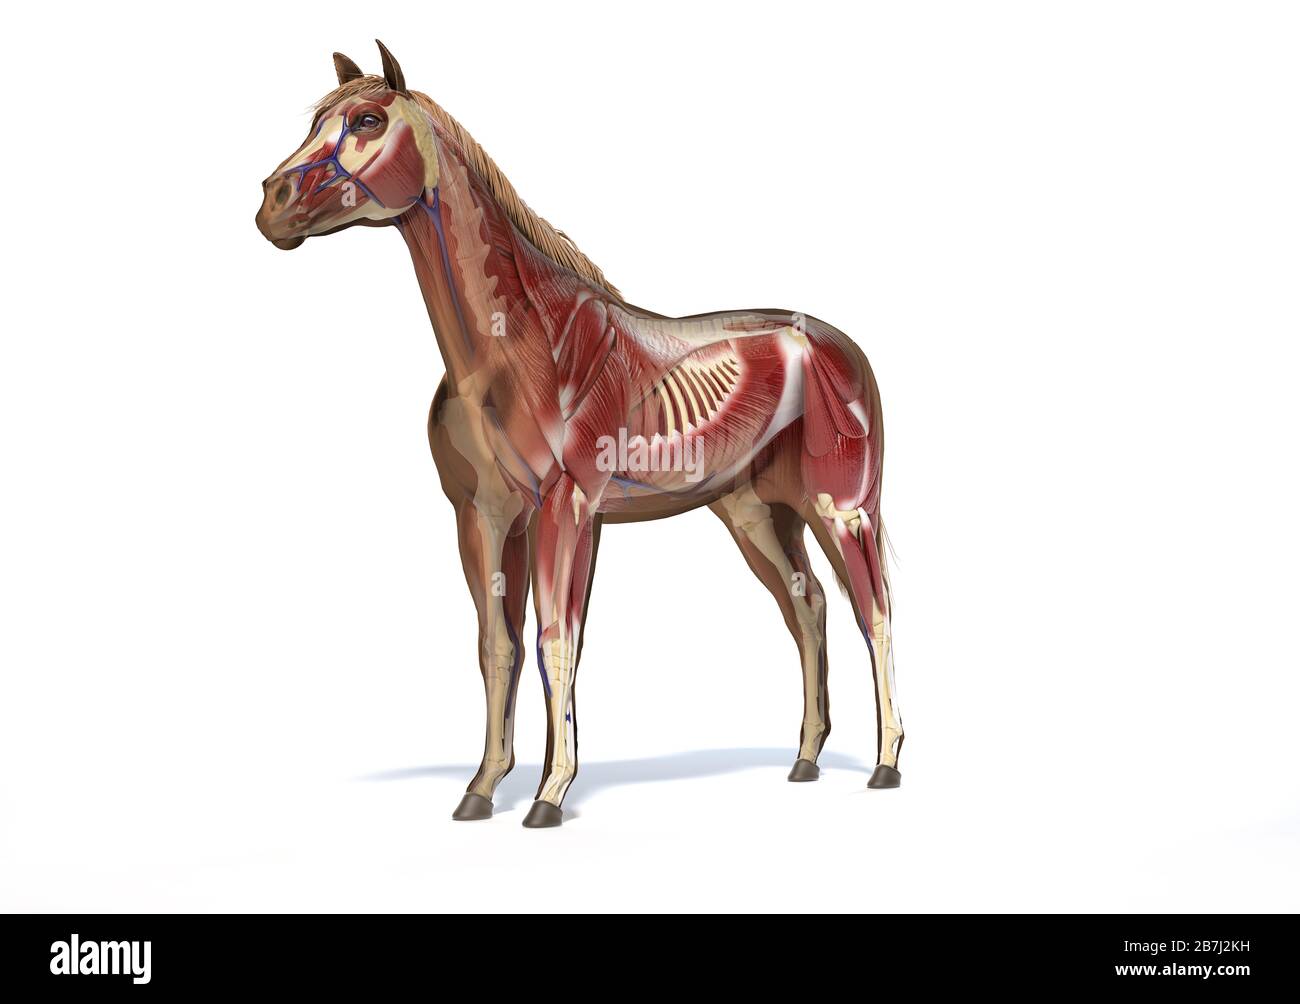 Horse Anatomy. Muscular and skeletal systems with ghost effect. Front - side perspective on white background. Clipping path included. Stock Photo